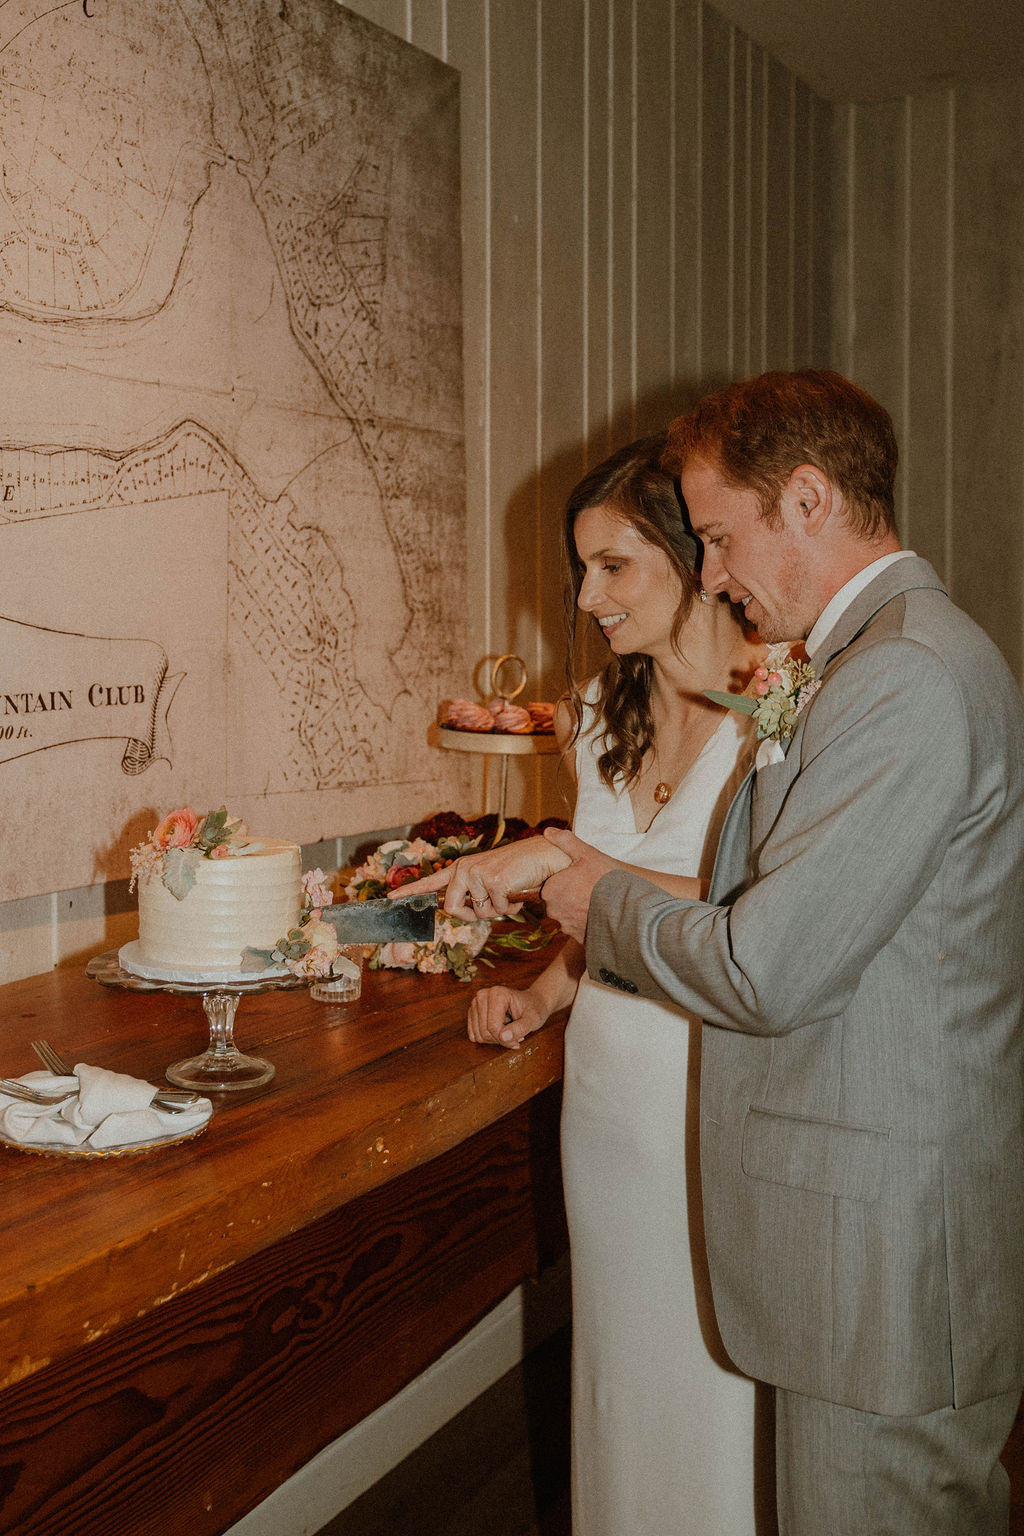 the bride and groom cutting the cake at the California wedding venue